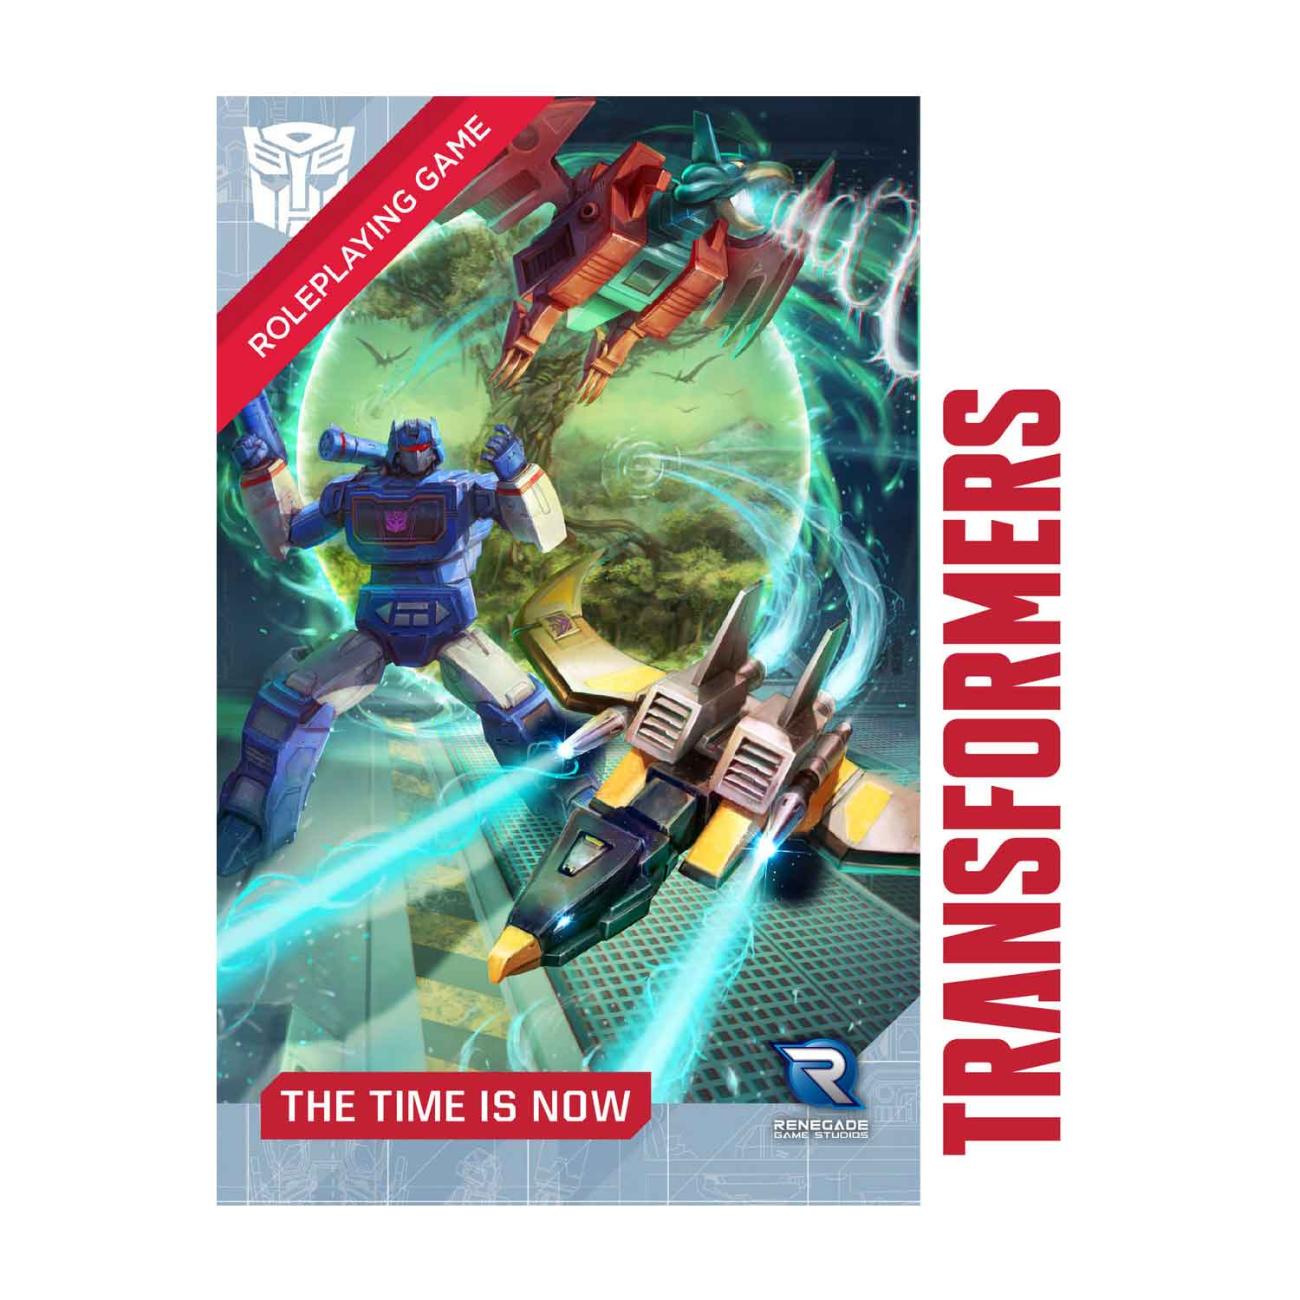 The Time is Now Adventure Book Transformers RPG